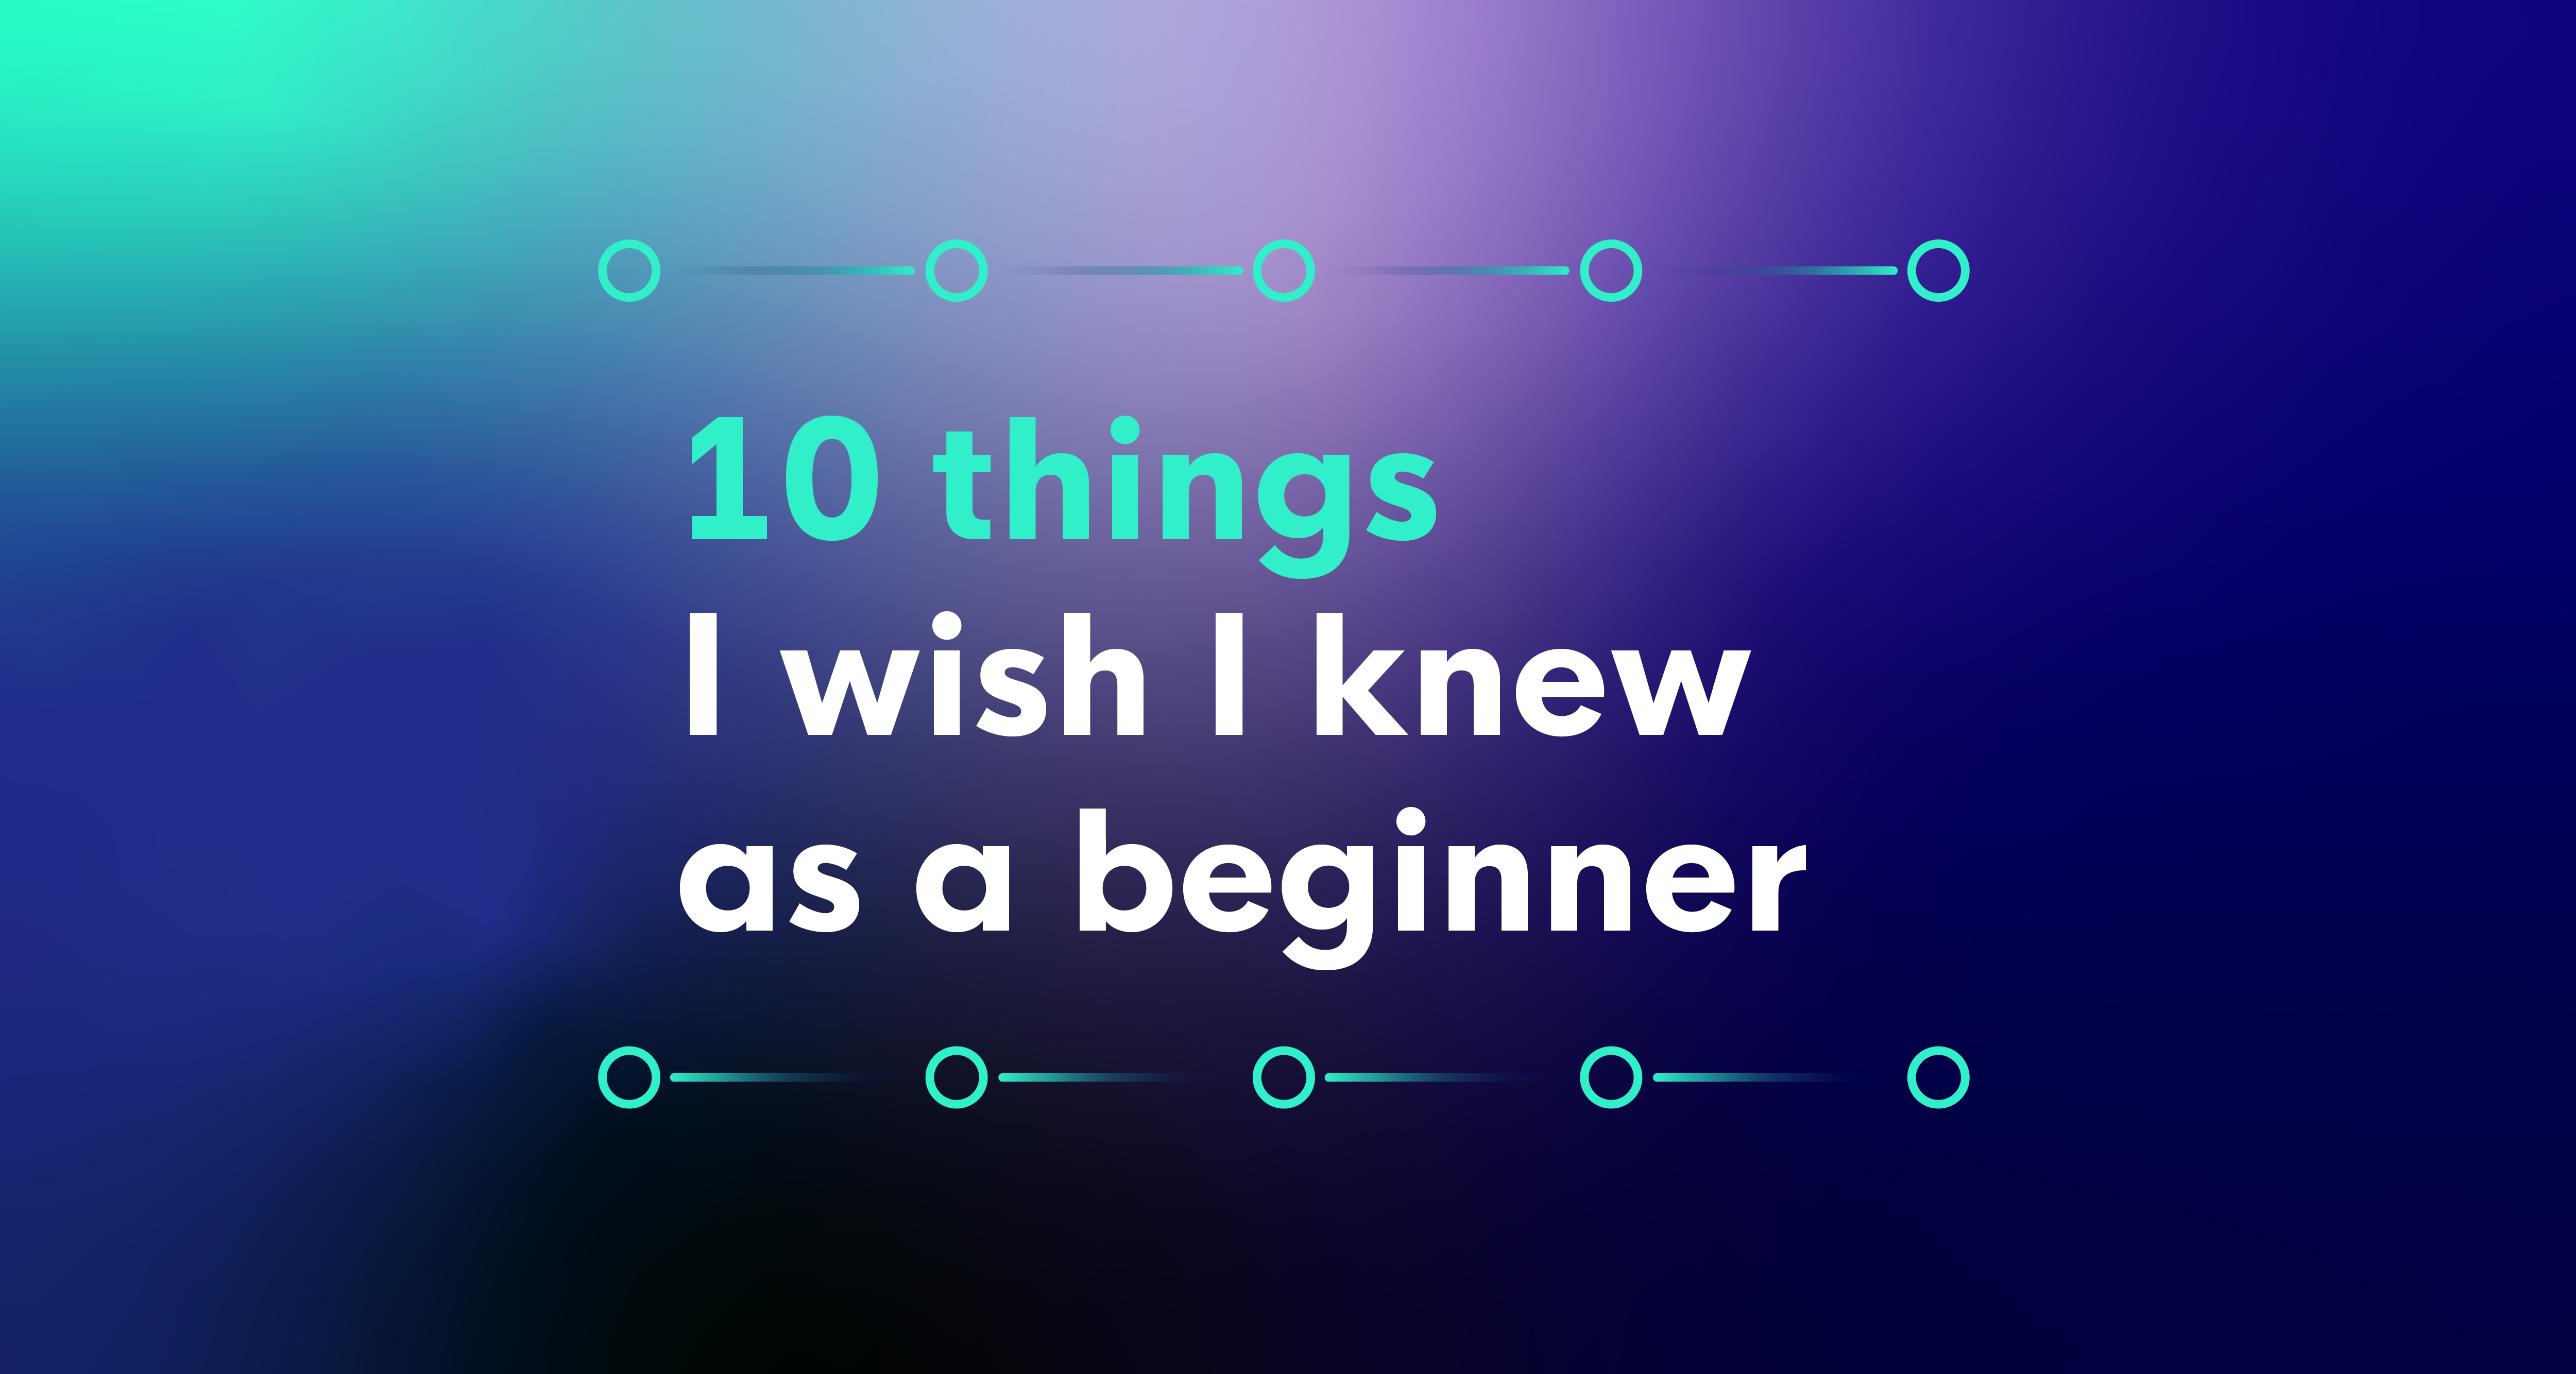 10 things I wish I knew as a beginner trader